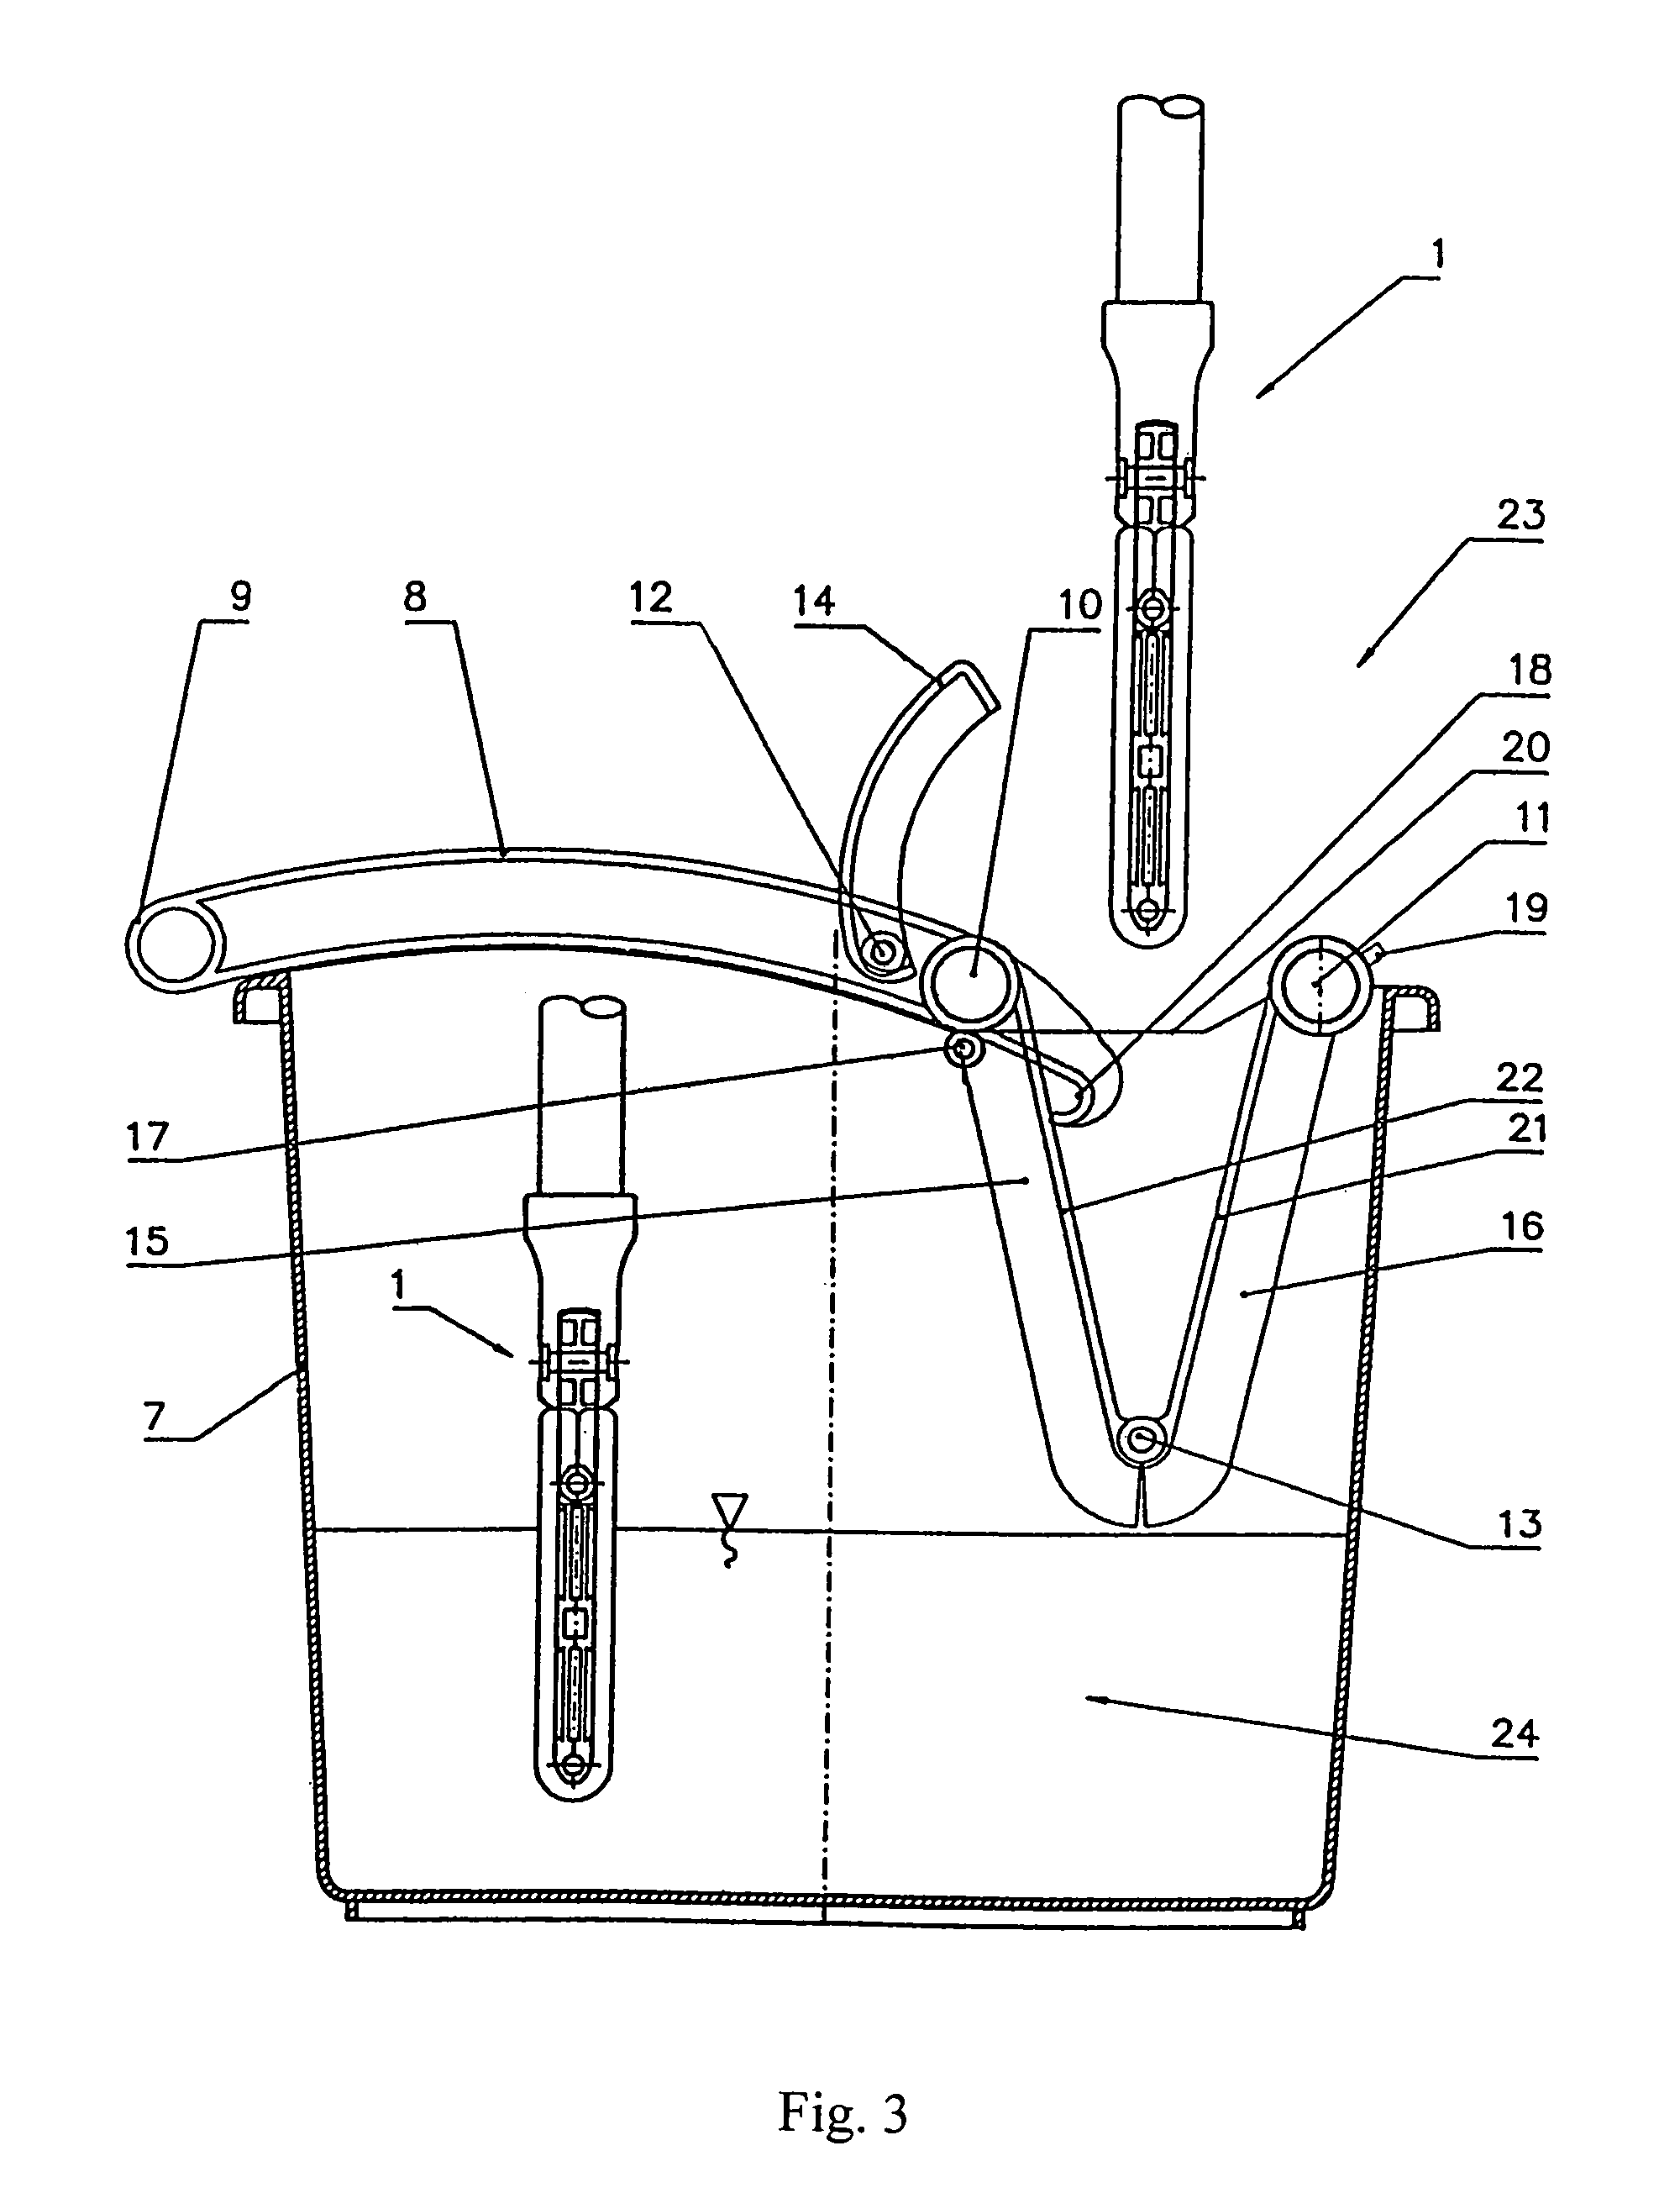 Device for squeezing liquid-absorbing wiper bodies